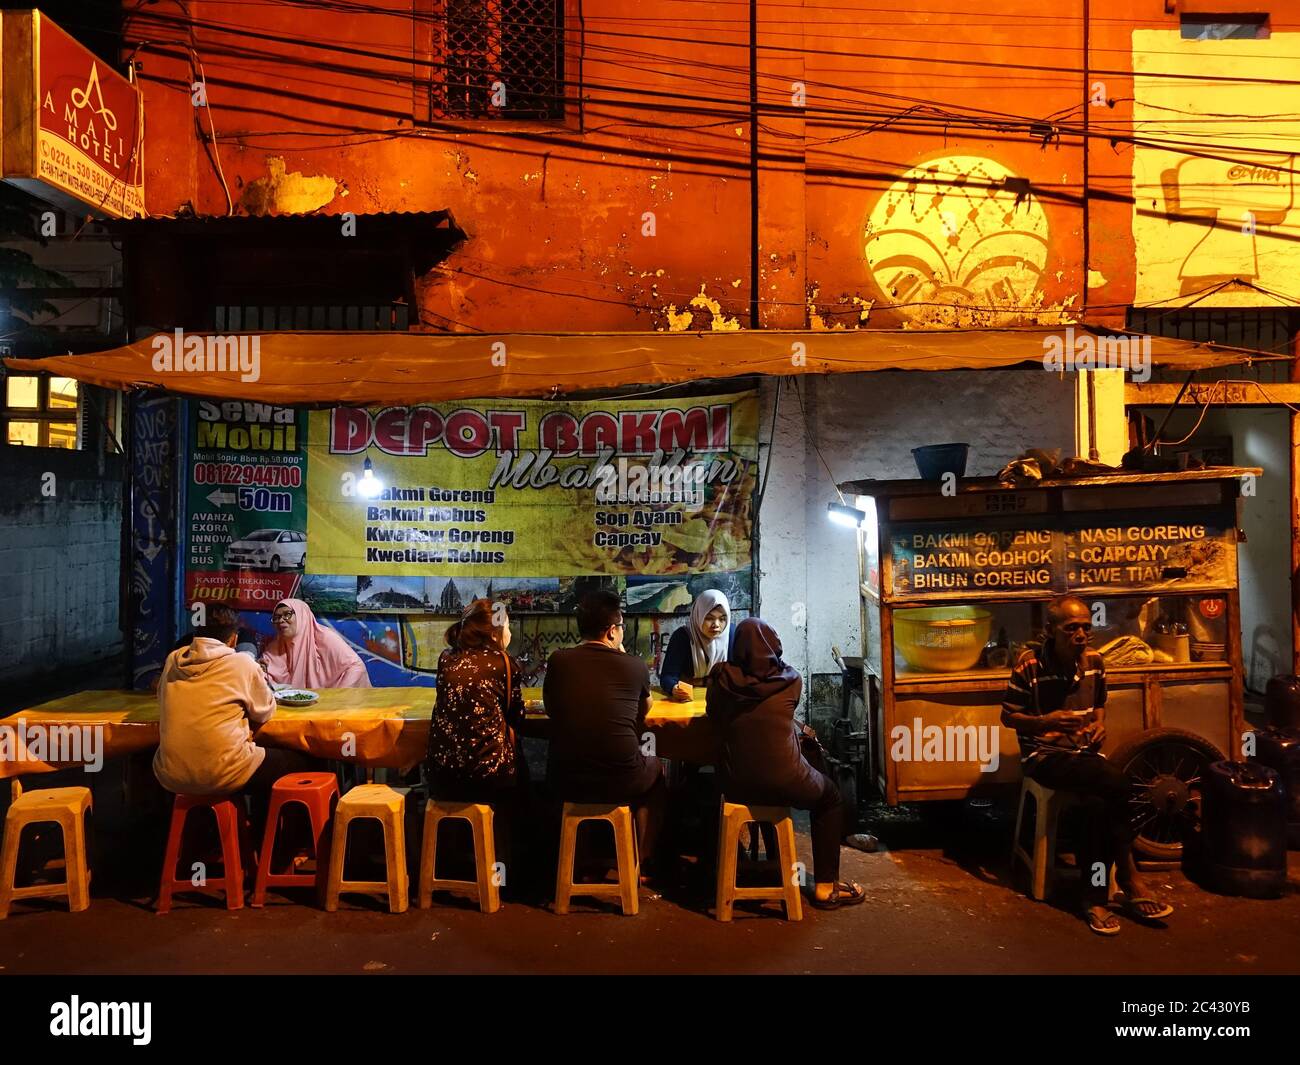 Indonesia Street Food High Resolution Stock Photography And Images Alamy